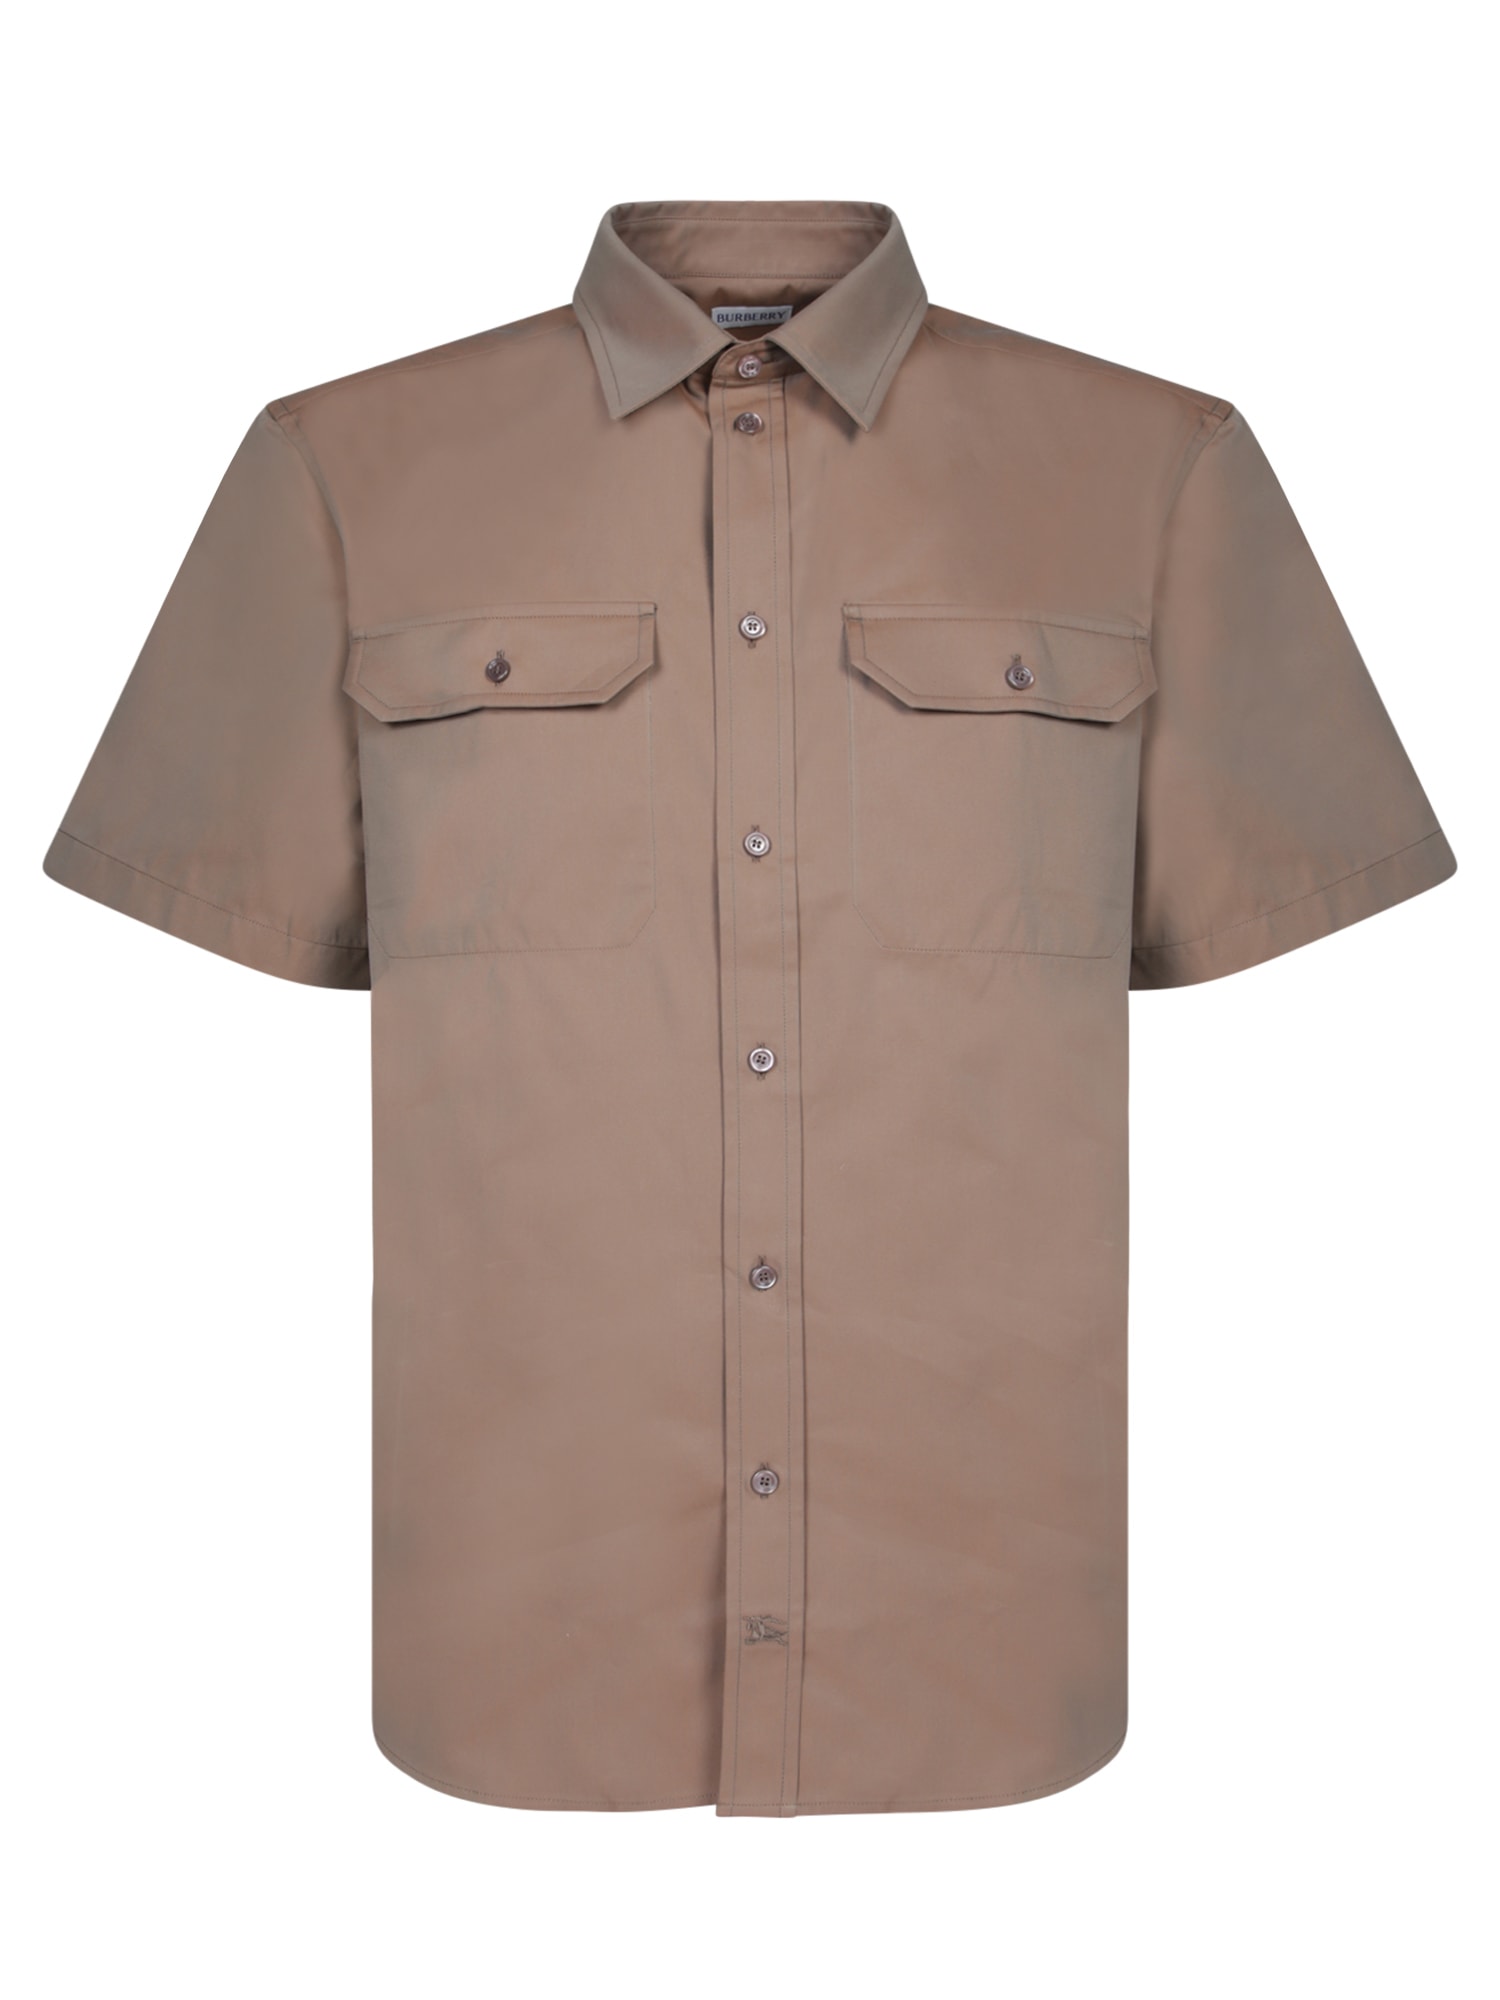 BURBERRY BURBERRY SHIRT IN BROWN